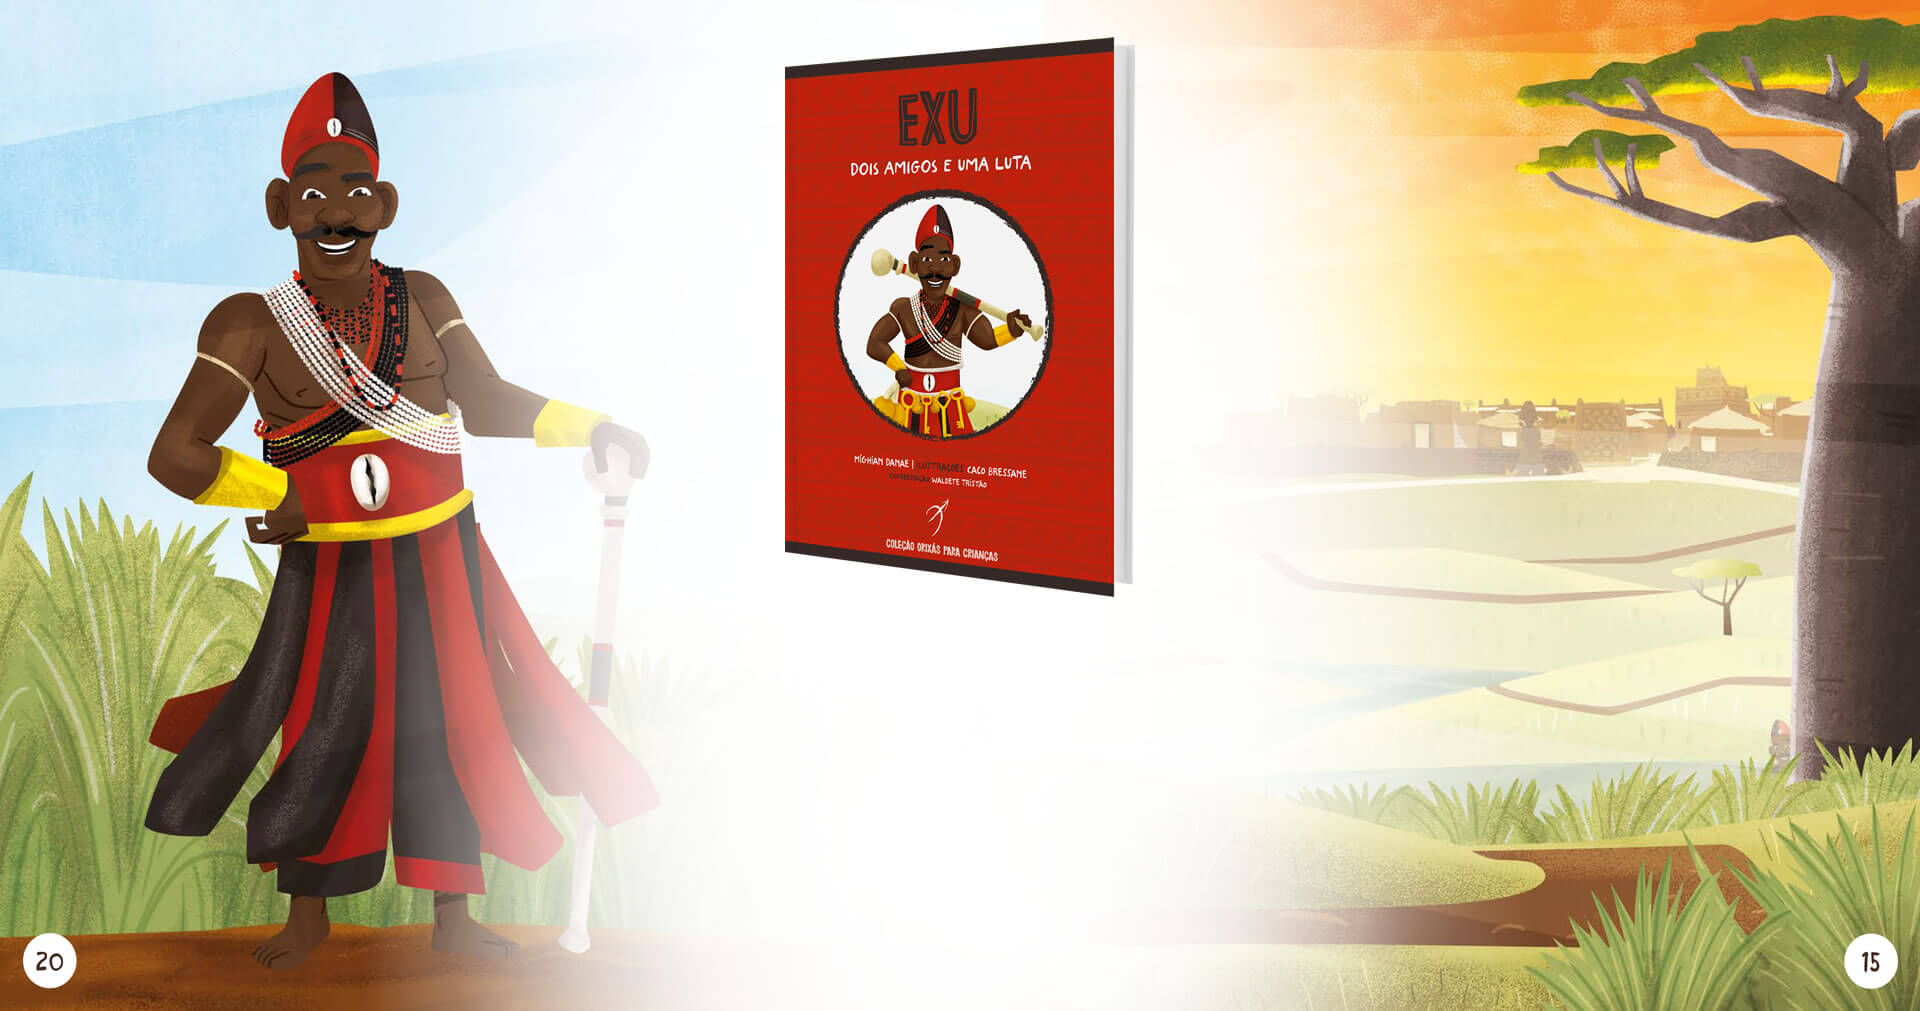 Arole Cultural | In the second volume - Eshu, two friends and a fight -, children will learn one of the most famous myths of Eshu, African God of communication.